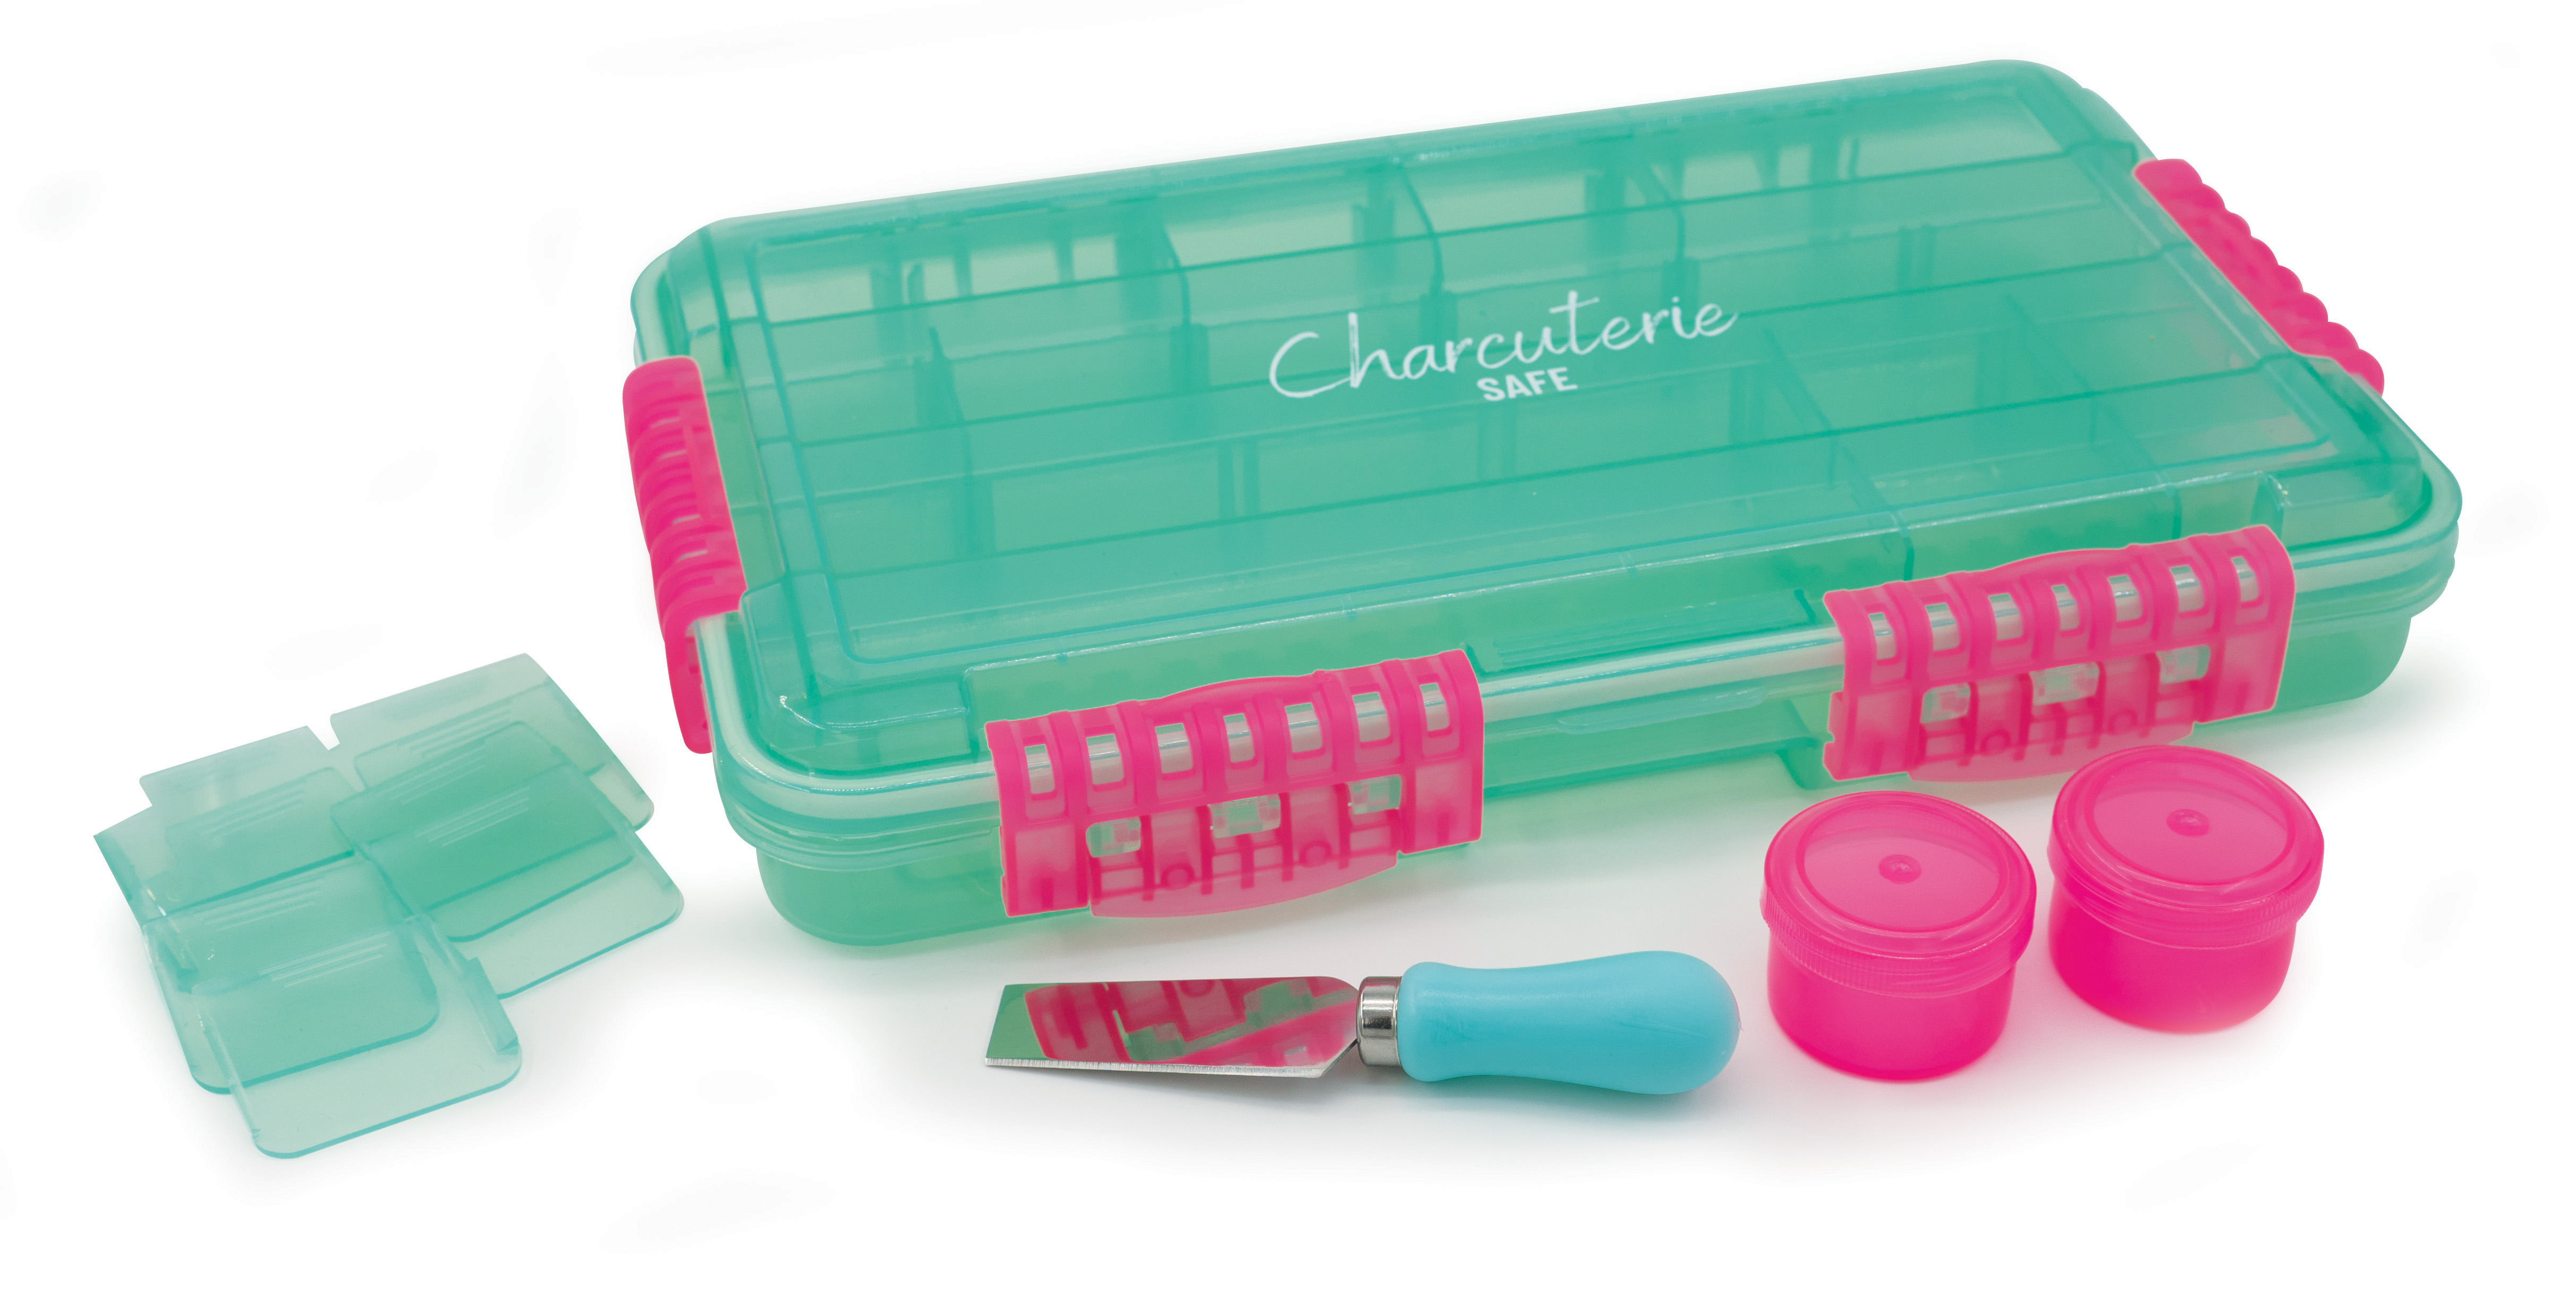 Charcuterie Safe: Snack Set For On The Go!